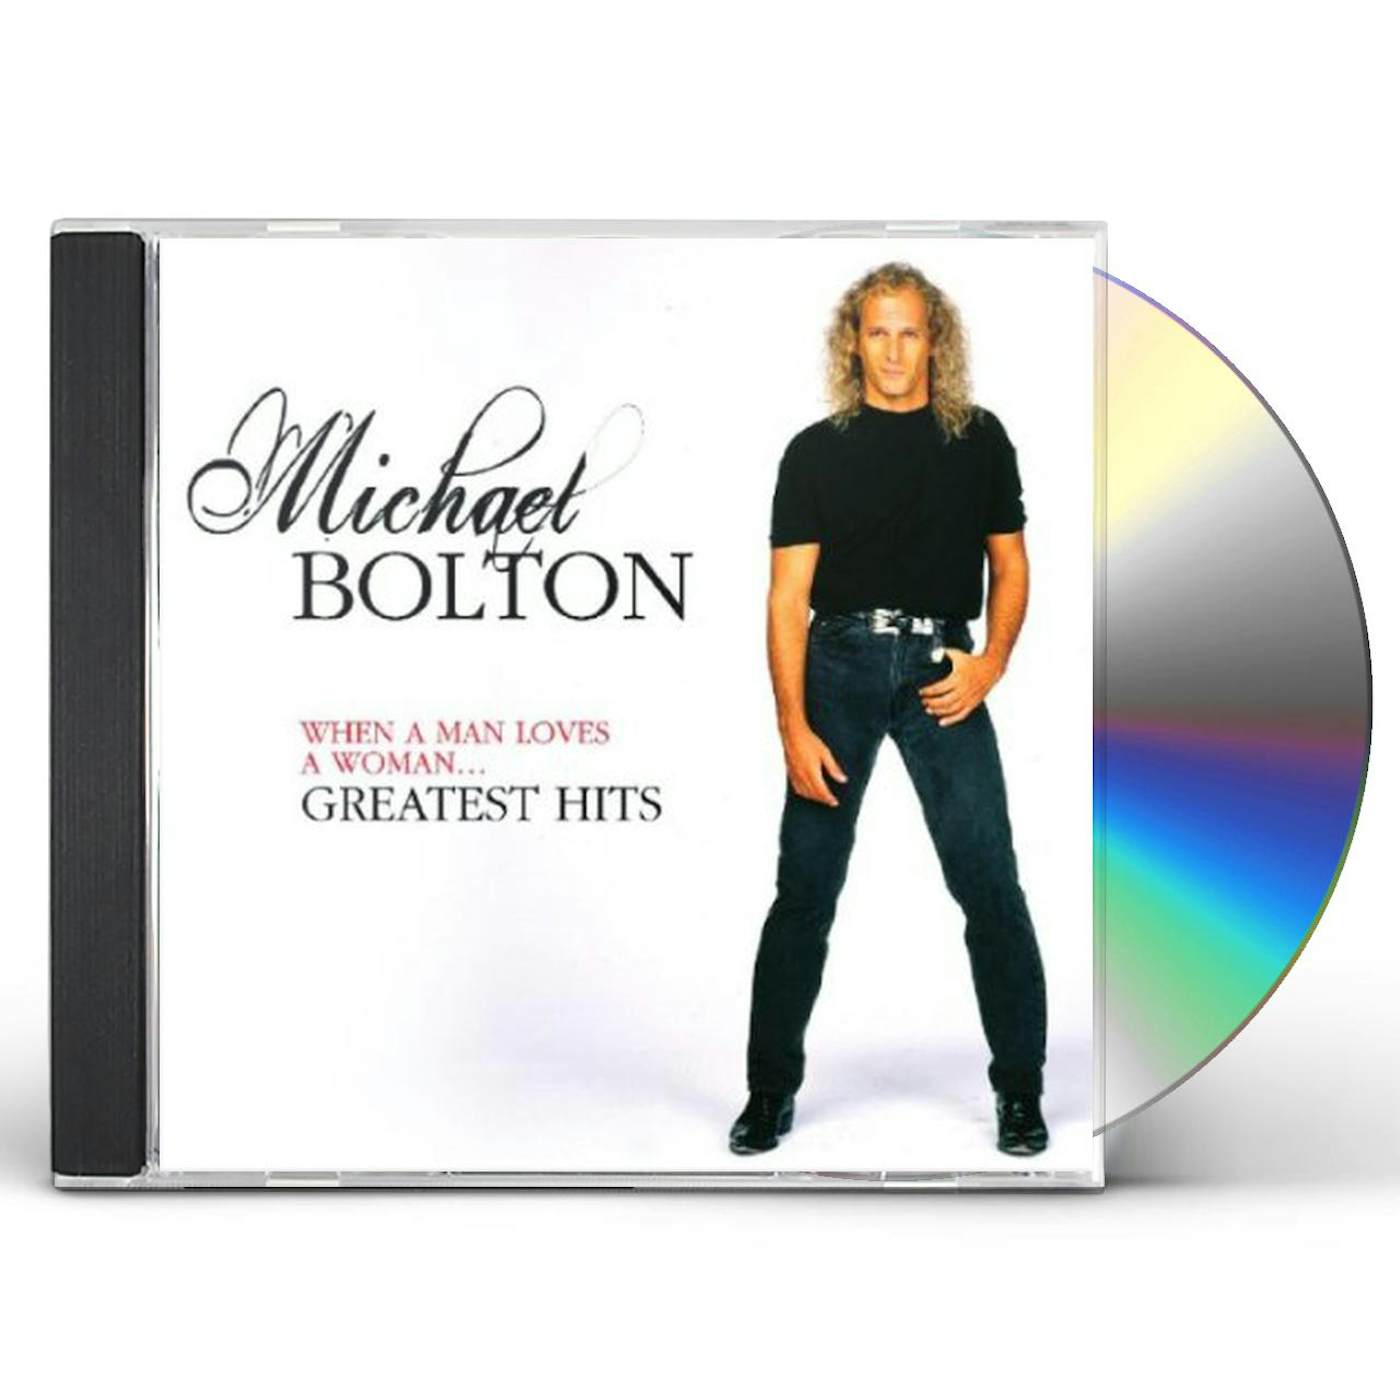 Michael Bolton WHEN A MAN LOVES A WOMAN: GREATEST HITS CD